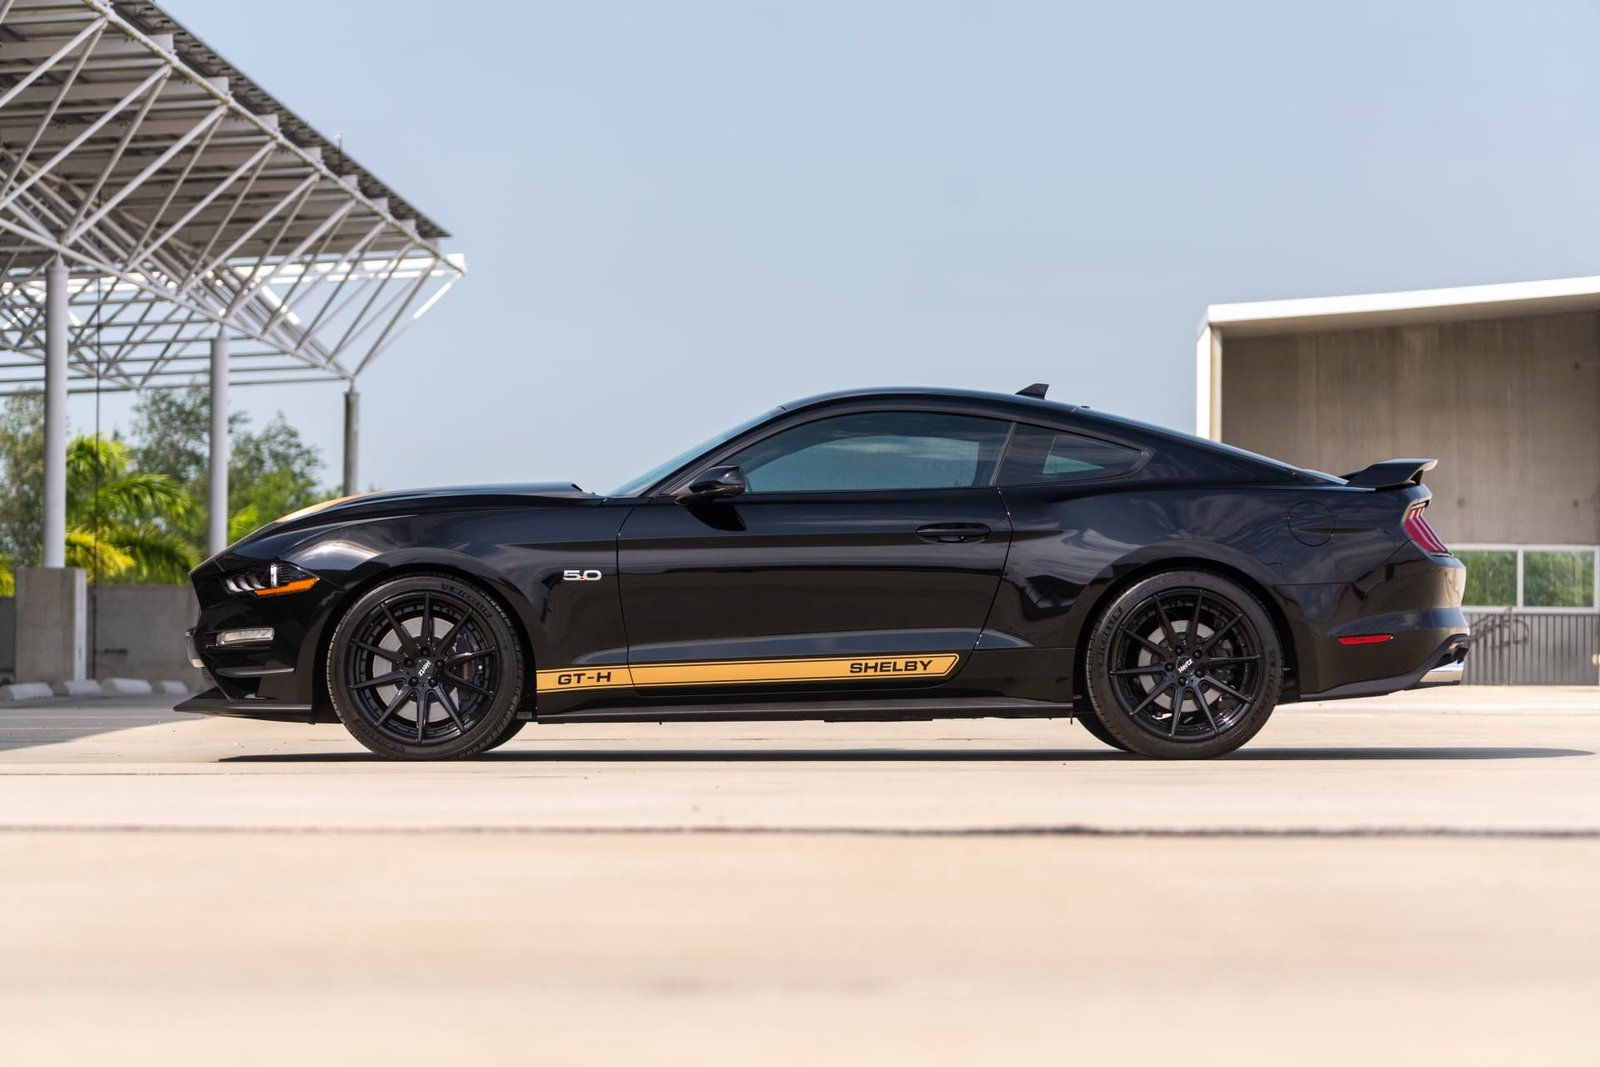 2022 Ford Shelby GT-H Prototype Coupe (10)